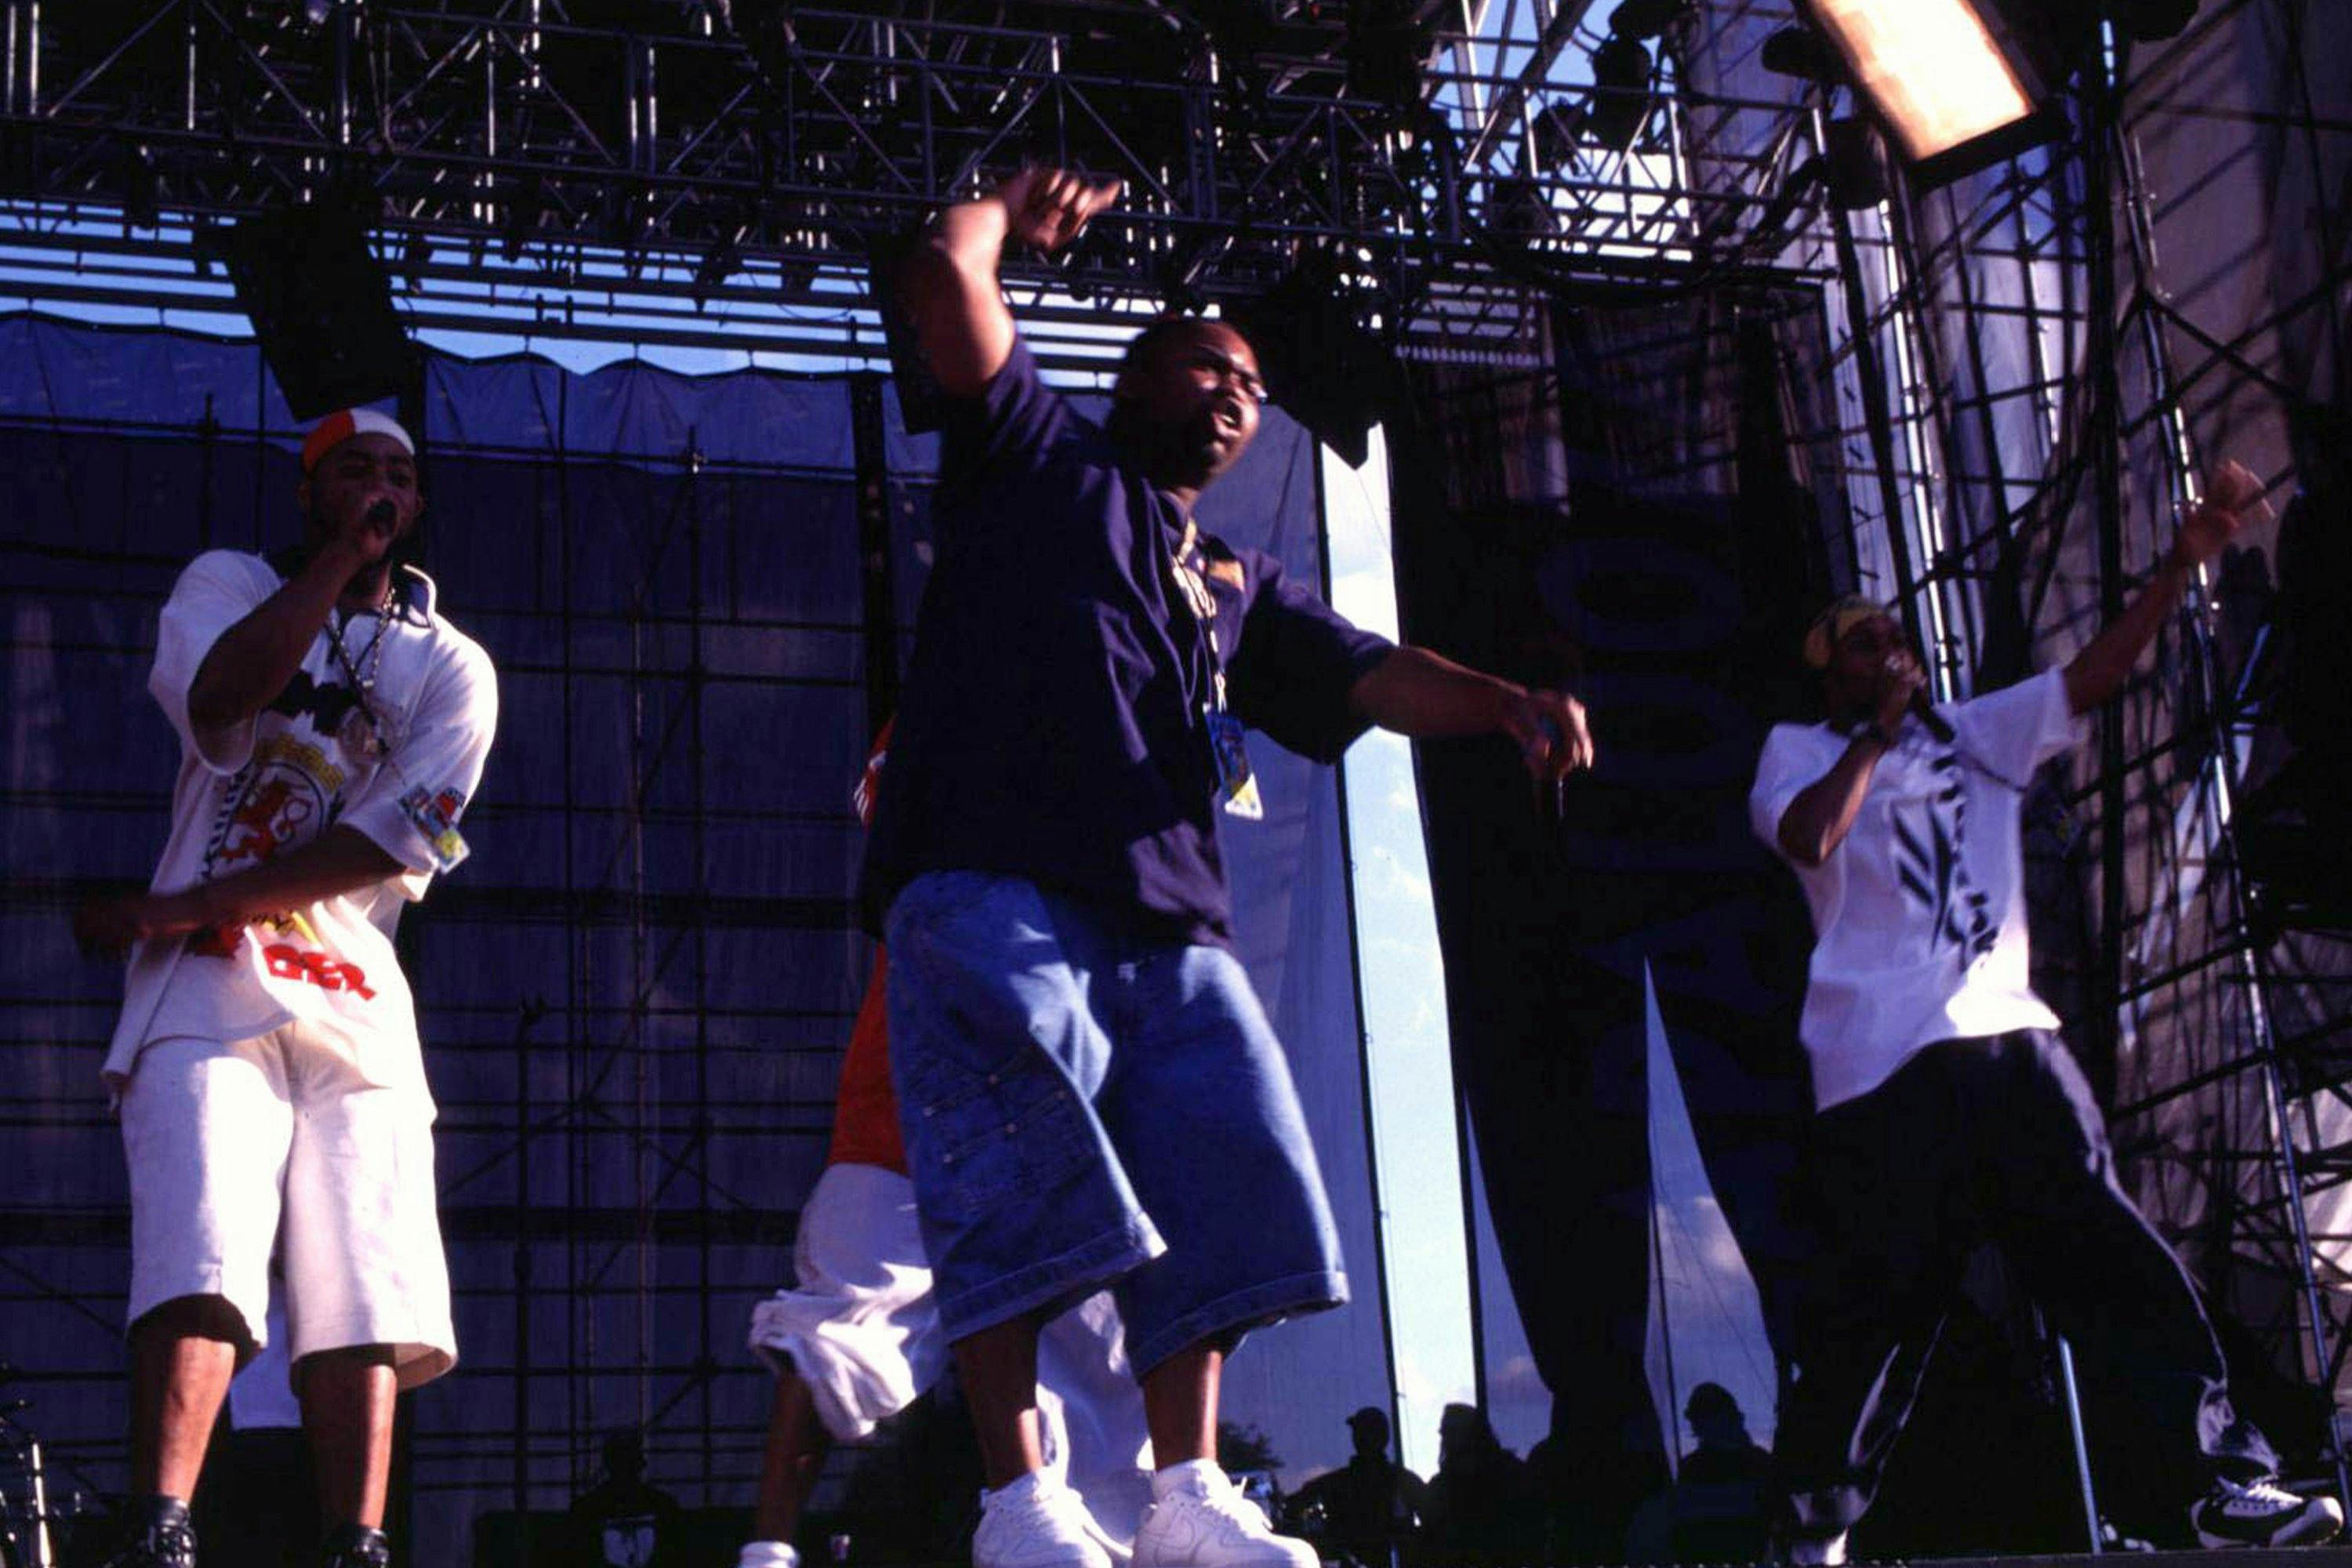 Wu-Tang Clan during Lollapalooza 1996 at Downing Stadium, Randall's Island in New York City at Downing Stadium, Randall's Island in New York, New York, United States. (Photo by Steve Eichner/WireImage)